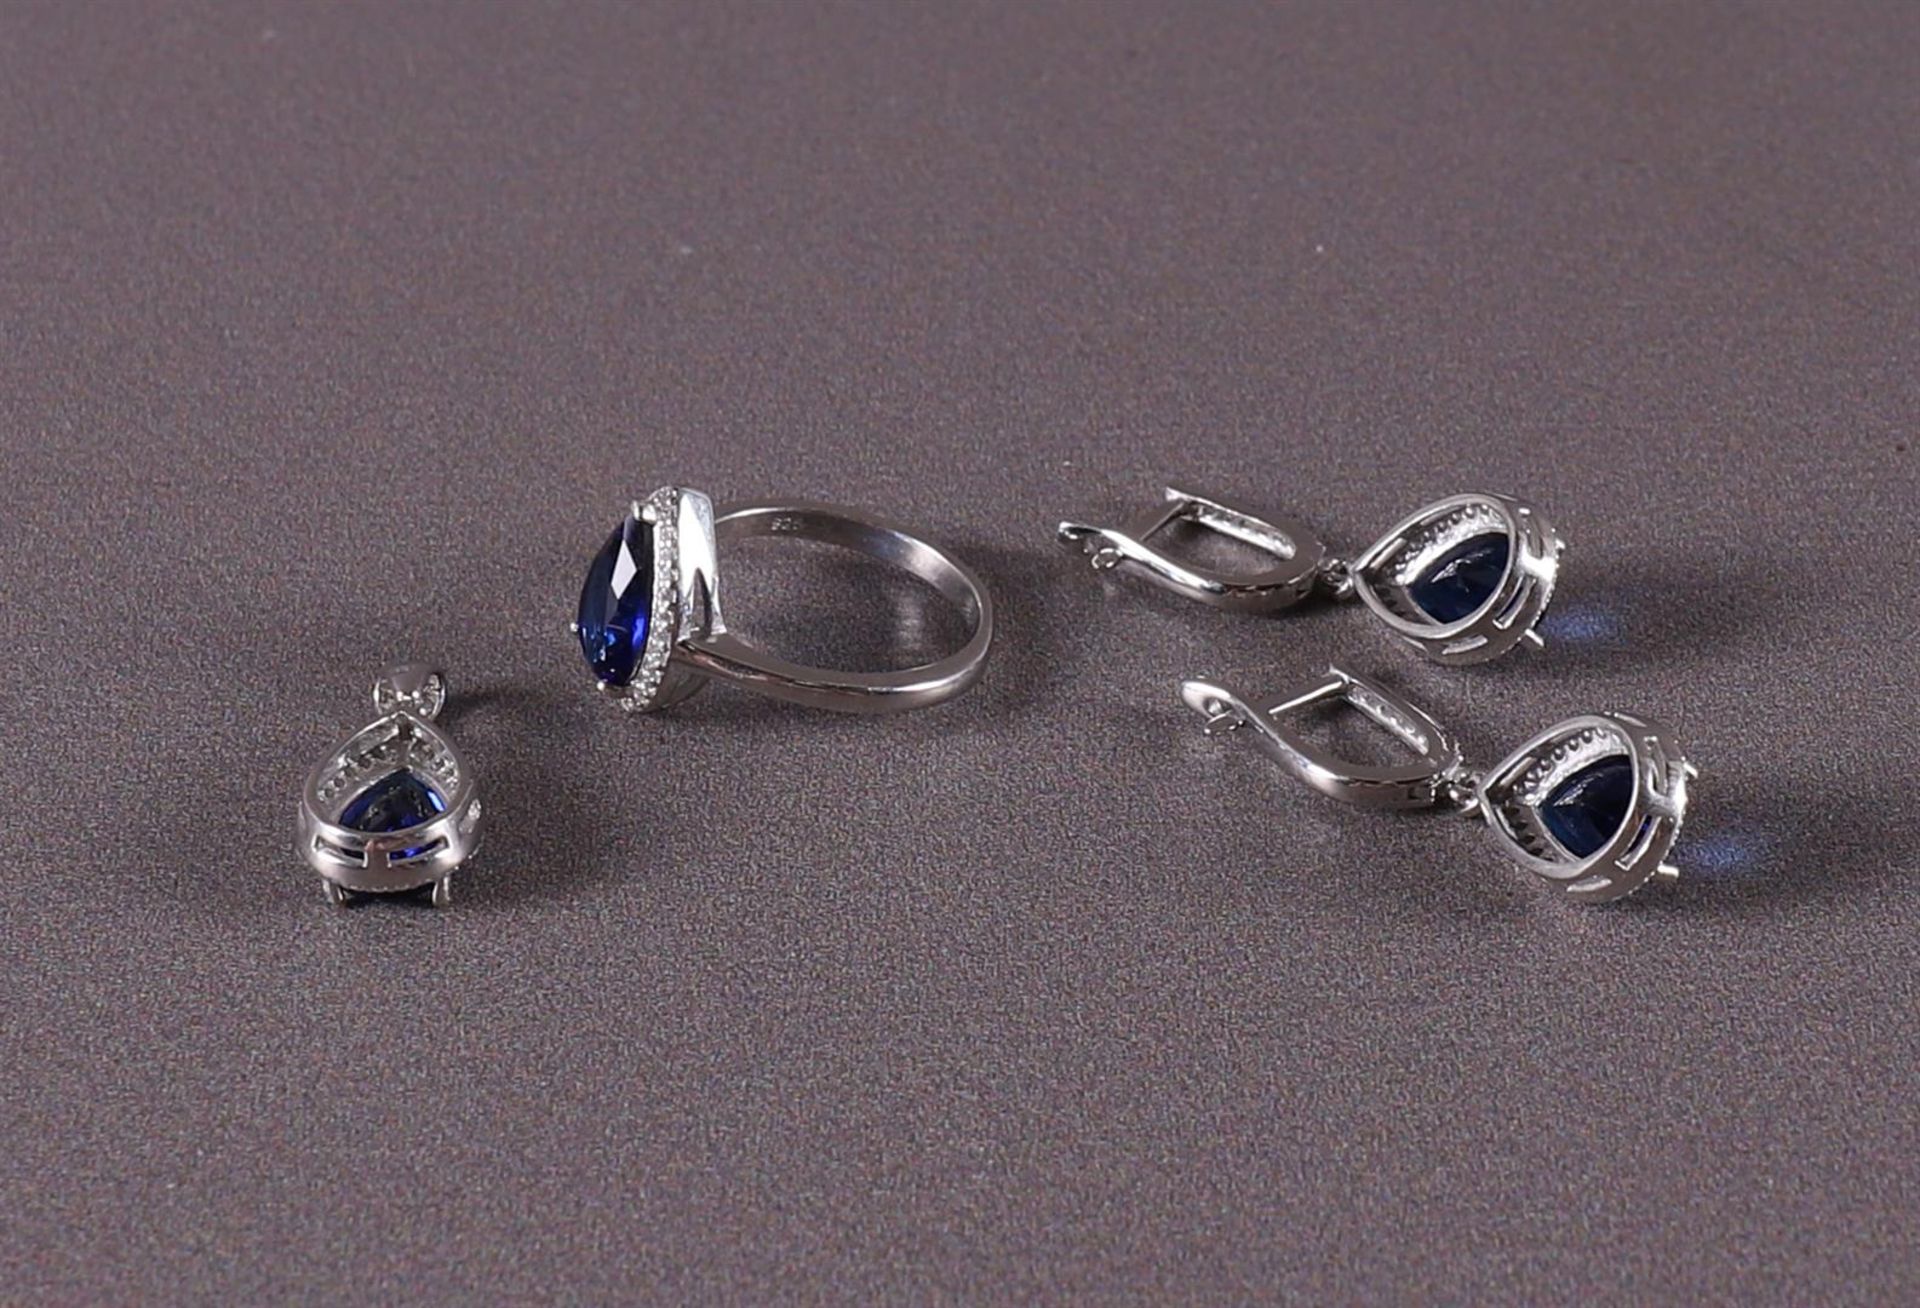 A 1st grade silver ring, earrings and pendant with blue stones - Image 3 of 3